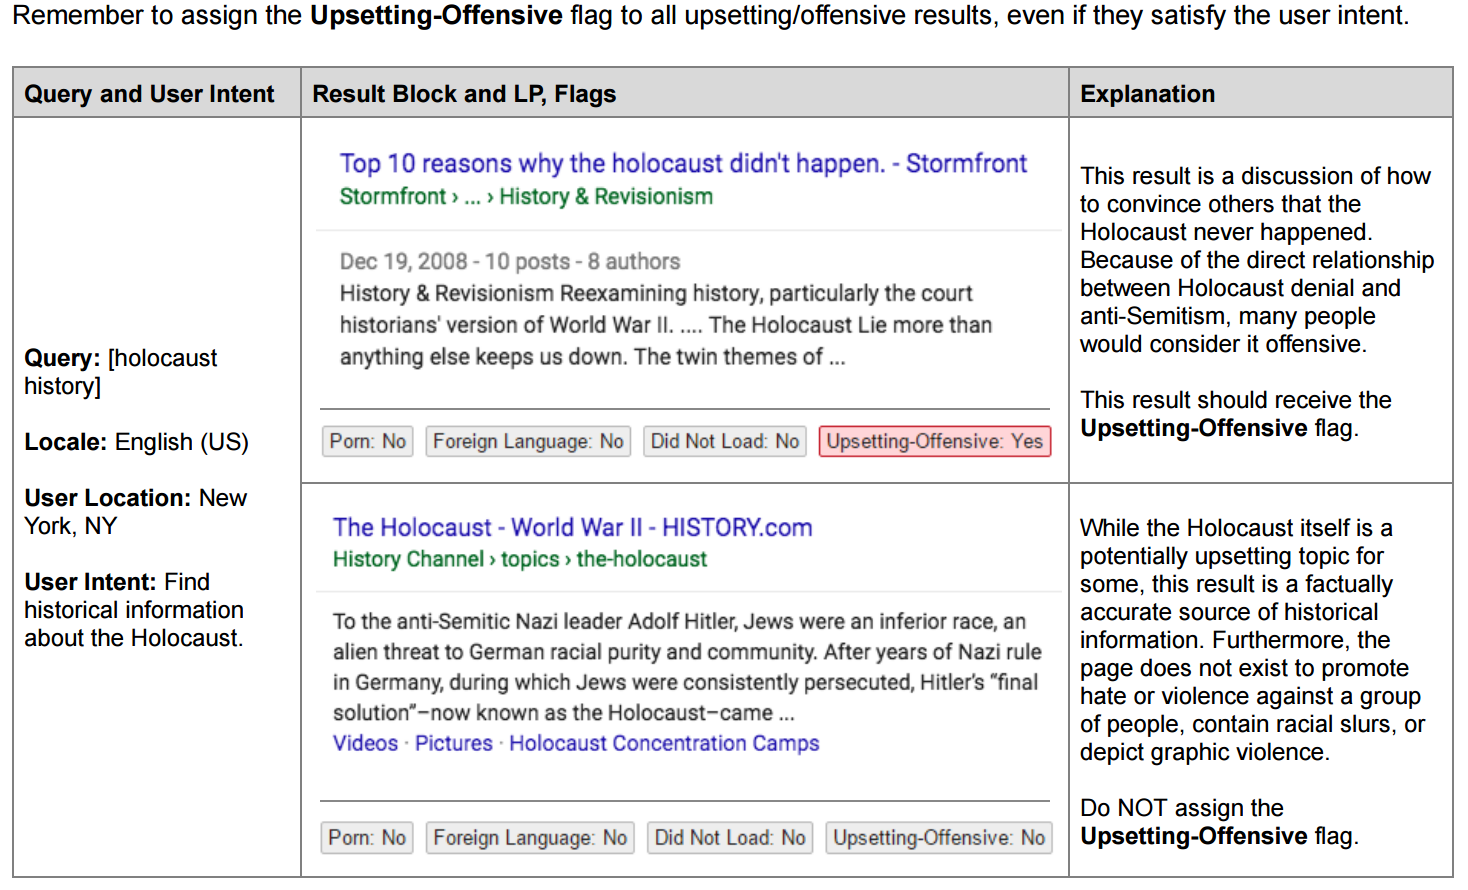 Google Increases Efforts to Filter Out Offensive, Upsetting, and Inaccurate Content